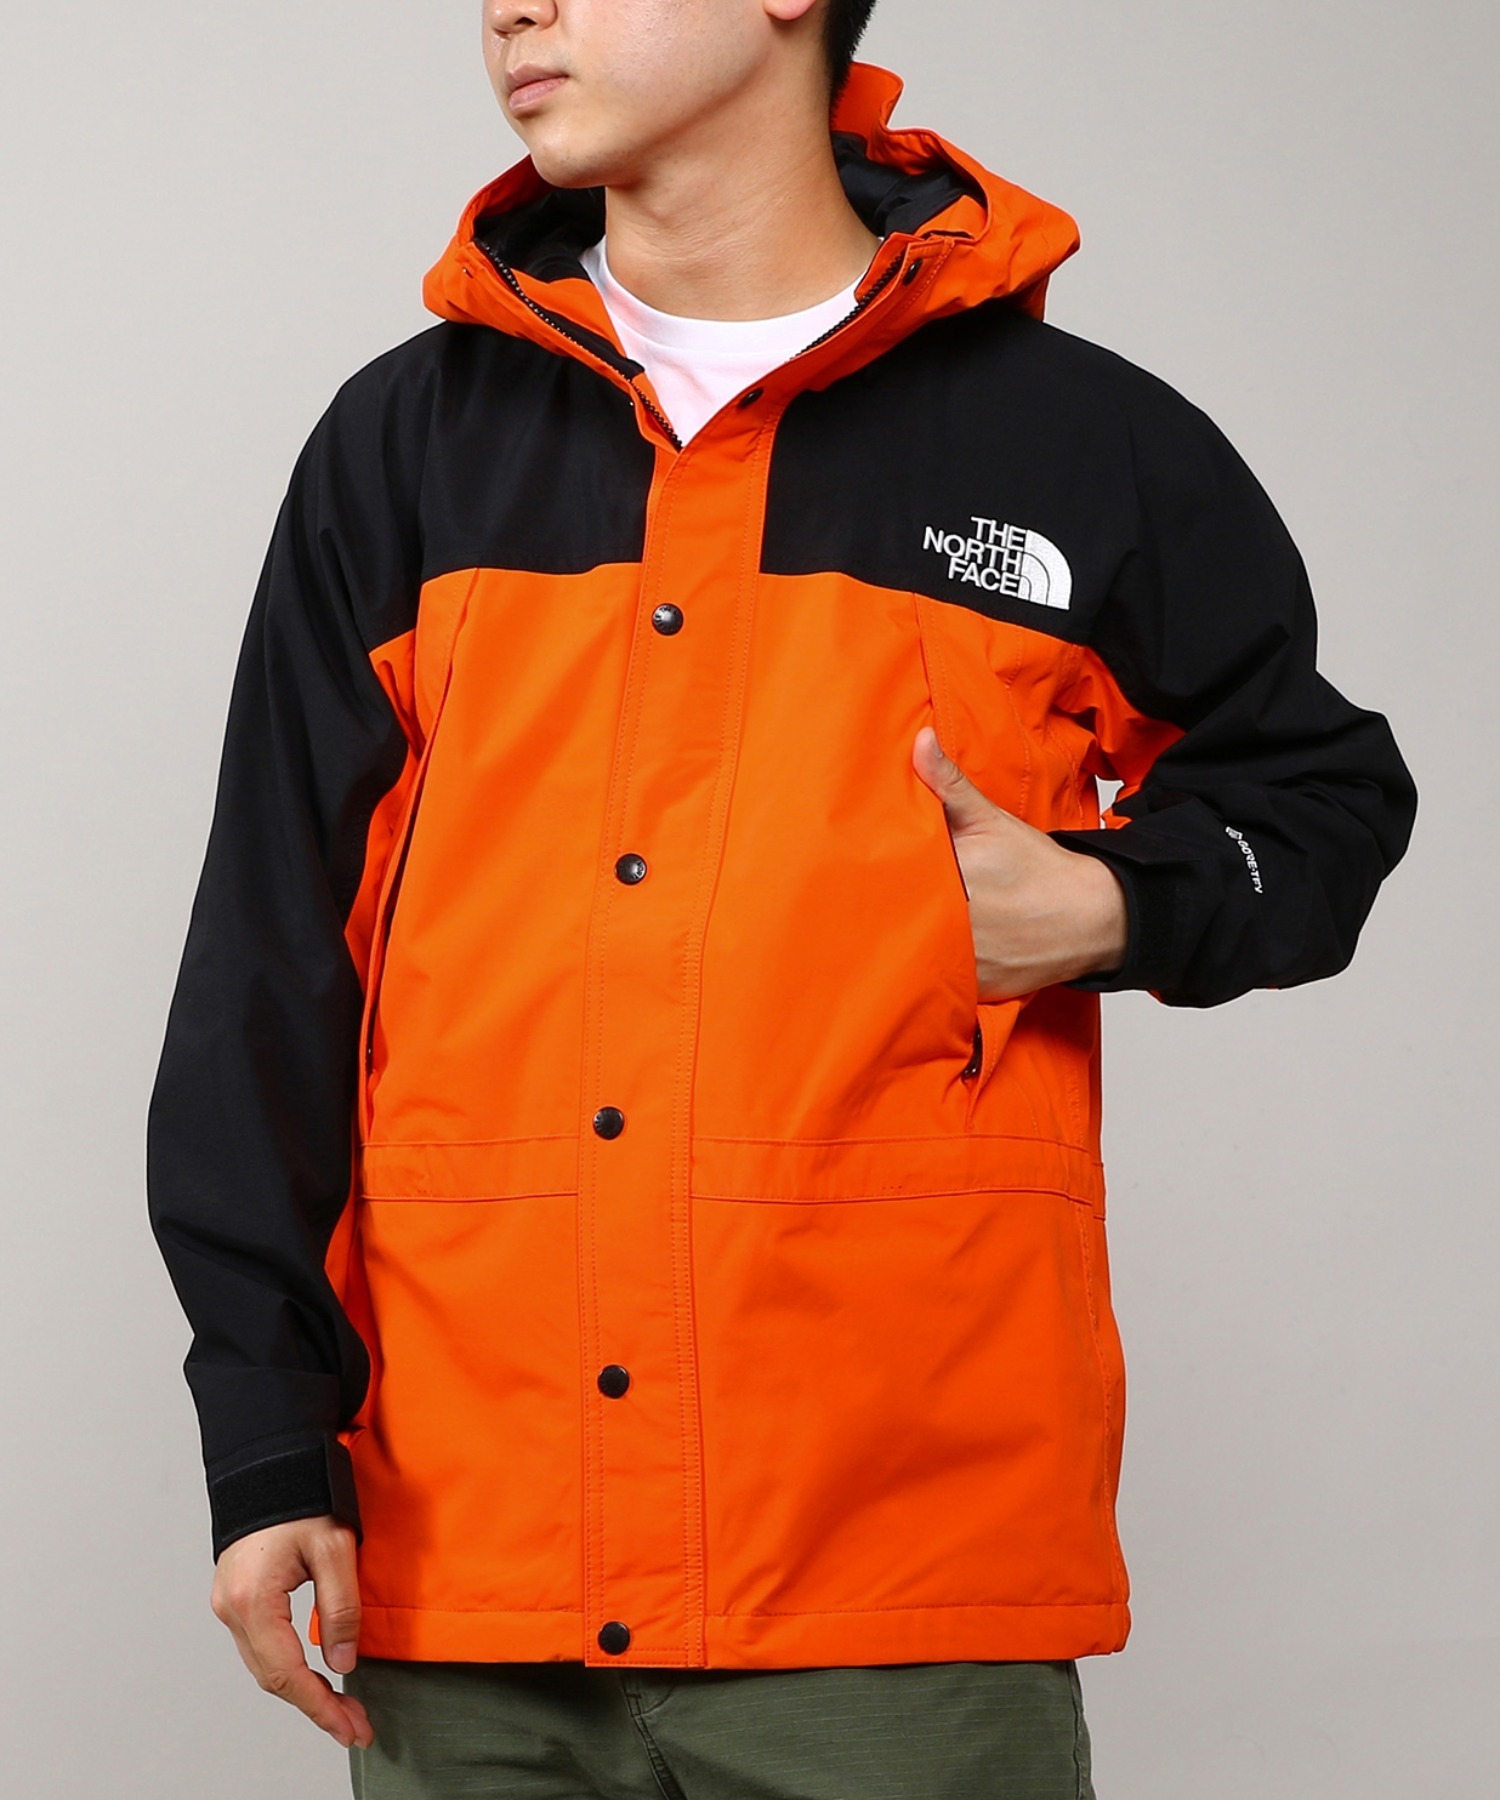 THE NORTH 数量限定価格 FACETHE 上品なスタイル FACE Mountain NP11834 Light Jacket